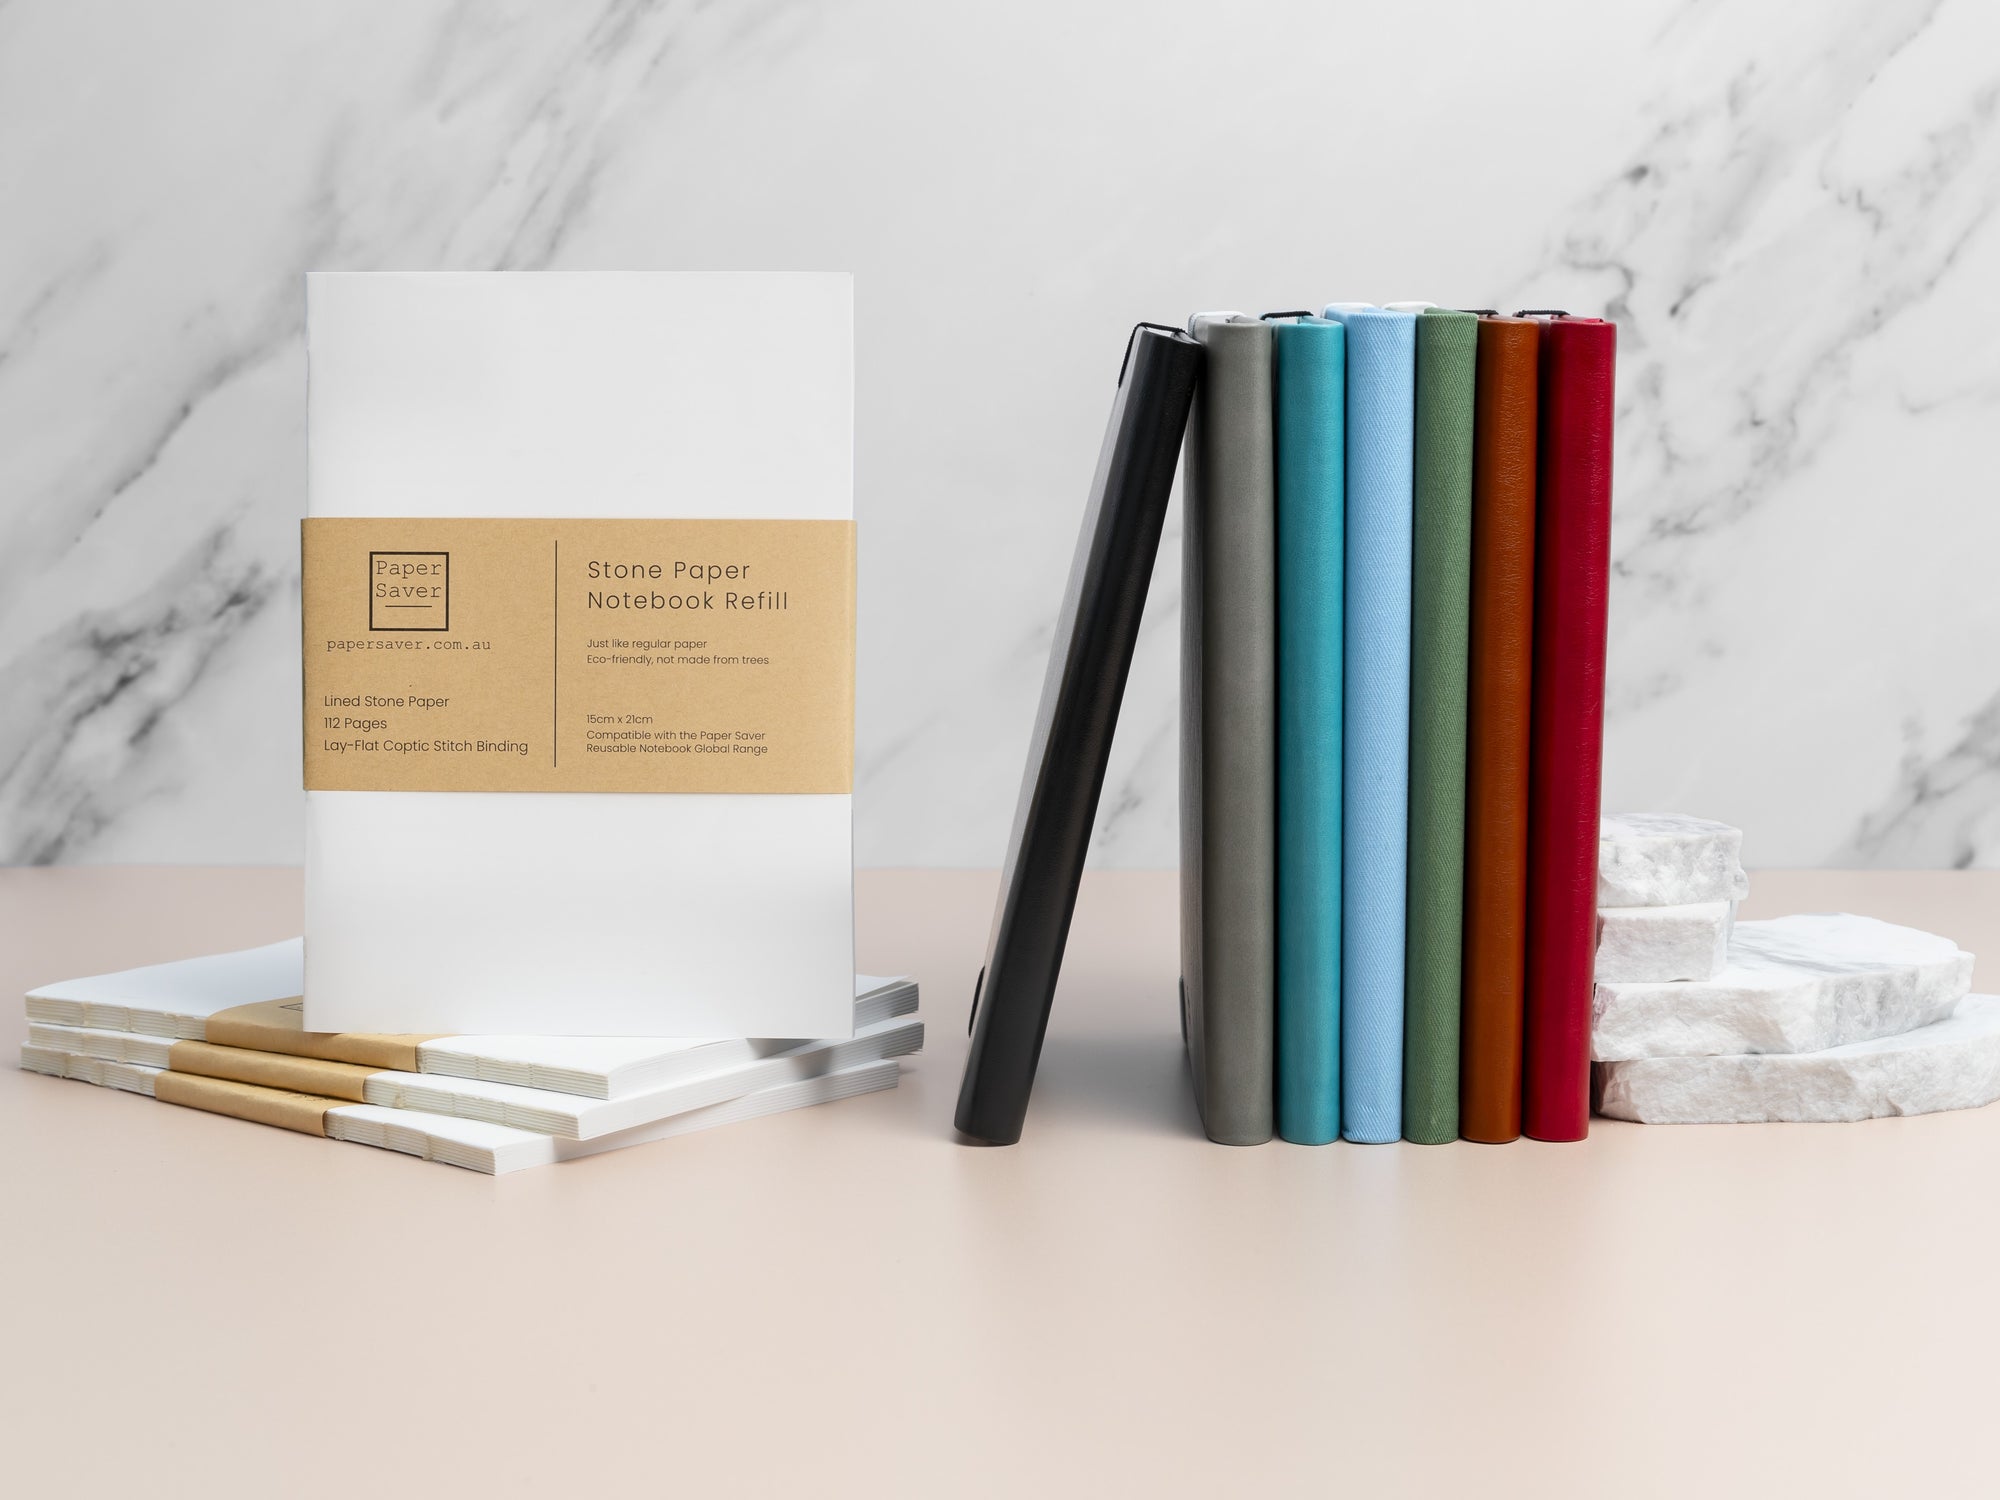 The Paper Saver Stone Paper Notebook Refill makes it easy to reuse your favourite Paper Saver Notebook again and again, sustainably and less waste.